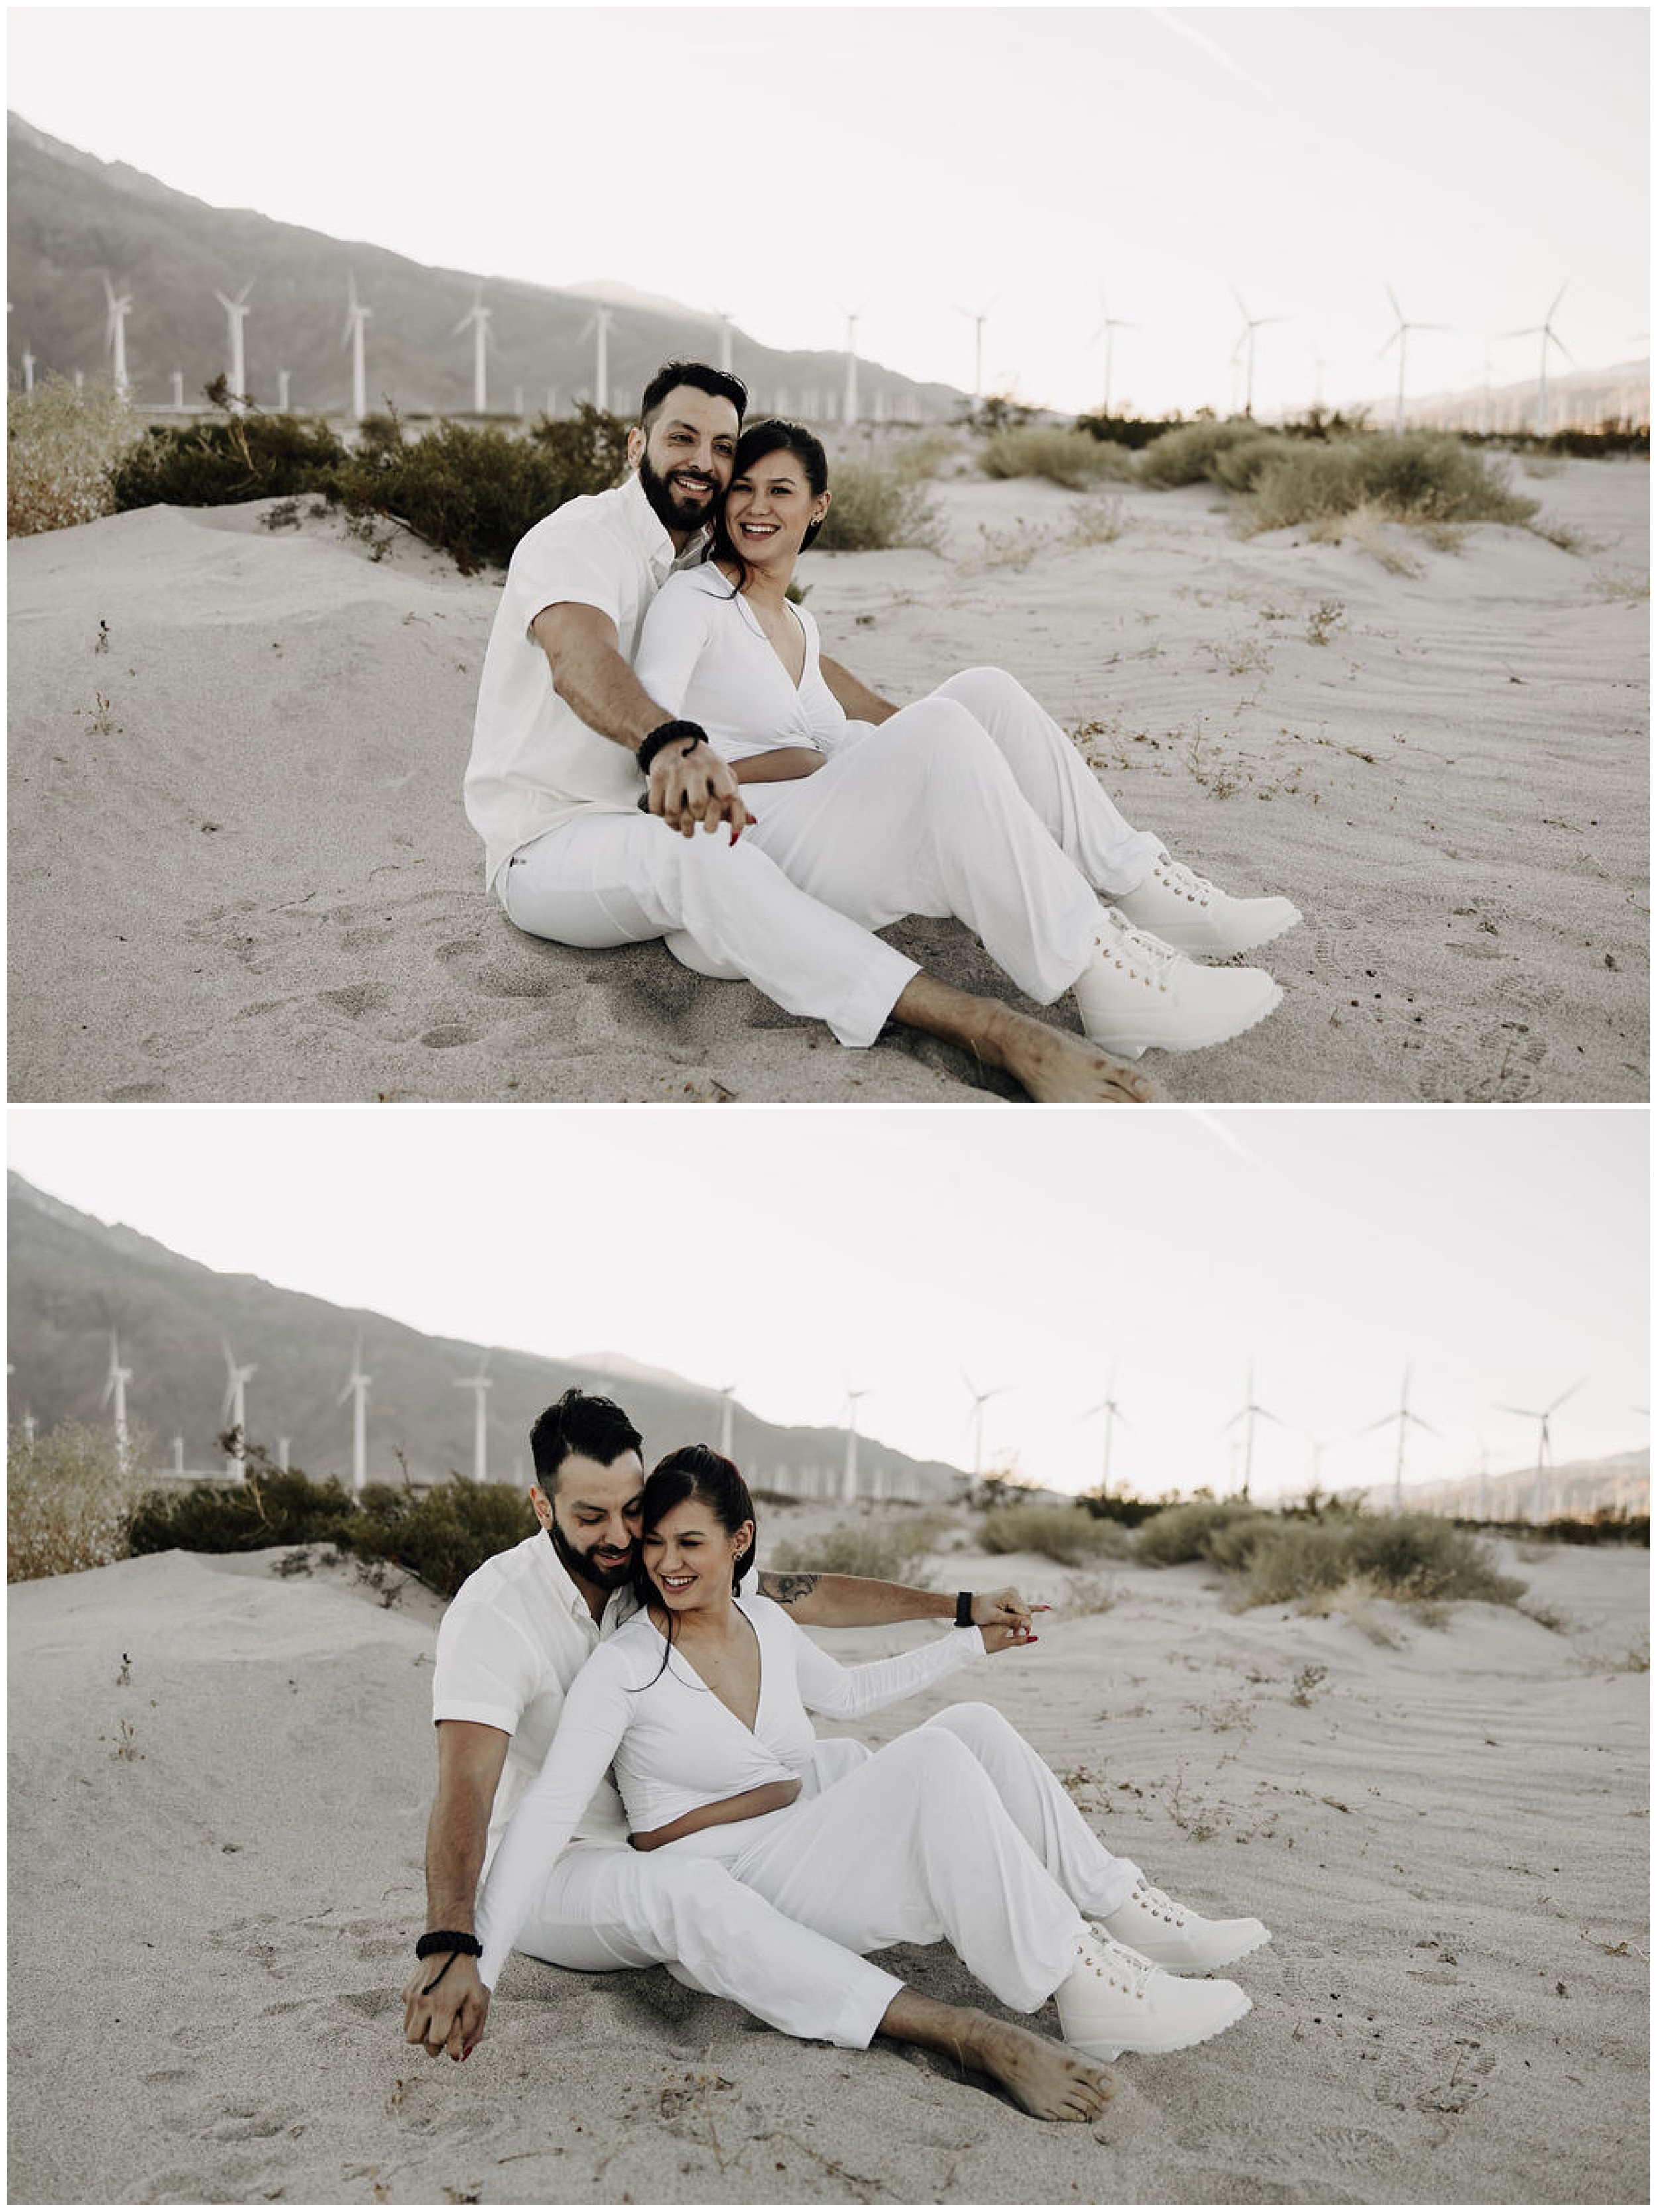 couple snuggling by windmills in desert